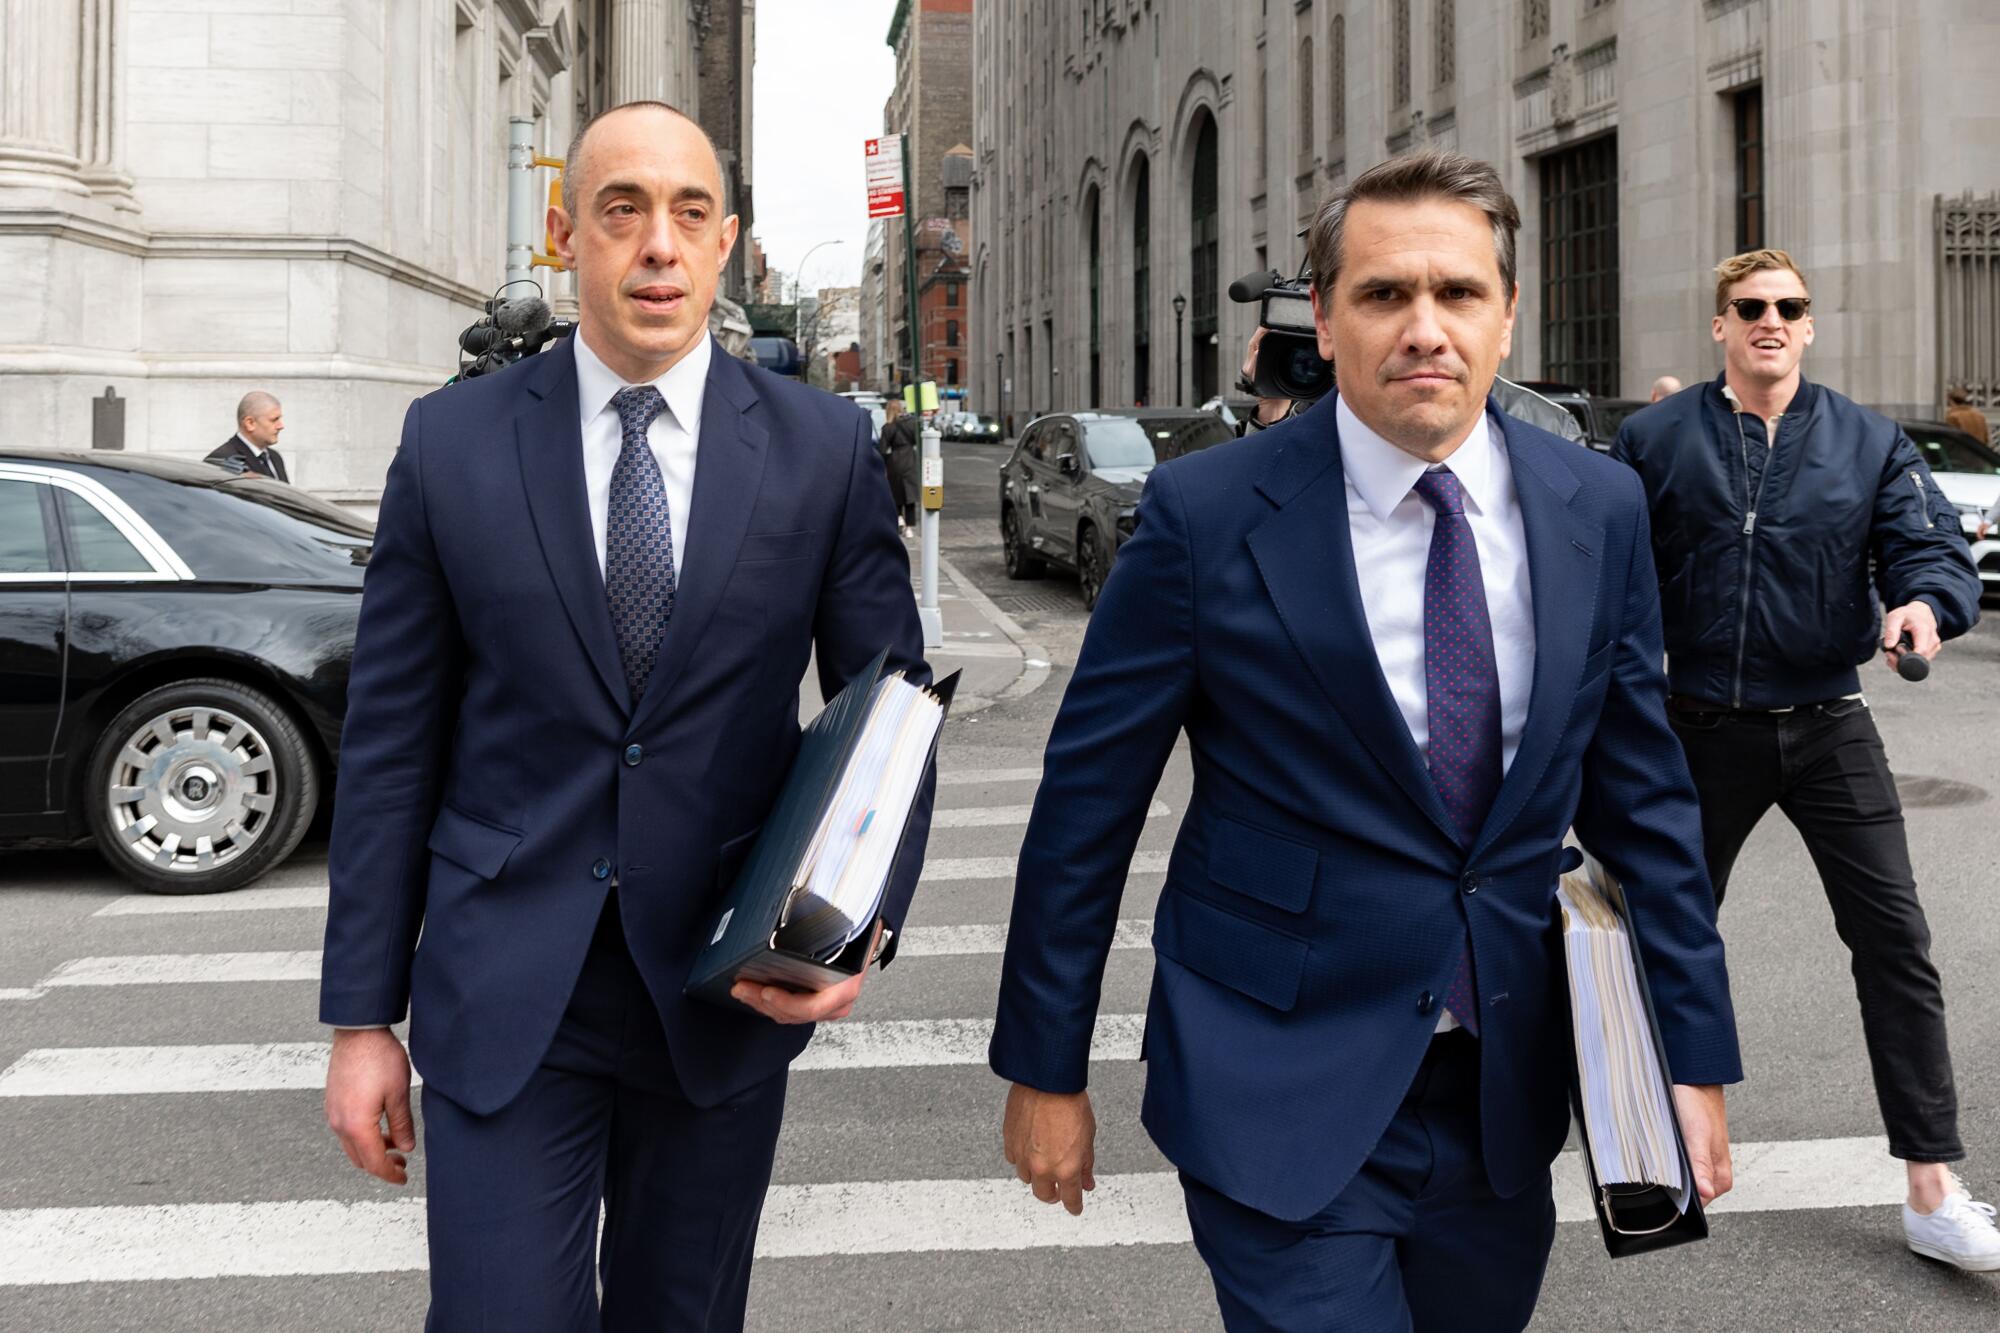 Two men in blue business suits with thick binders cross a city street, as a man holding out a mic tries to catch up.